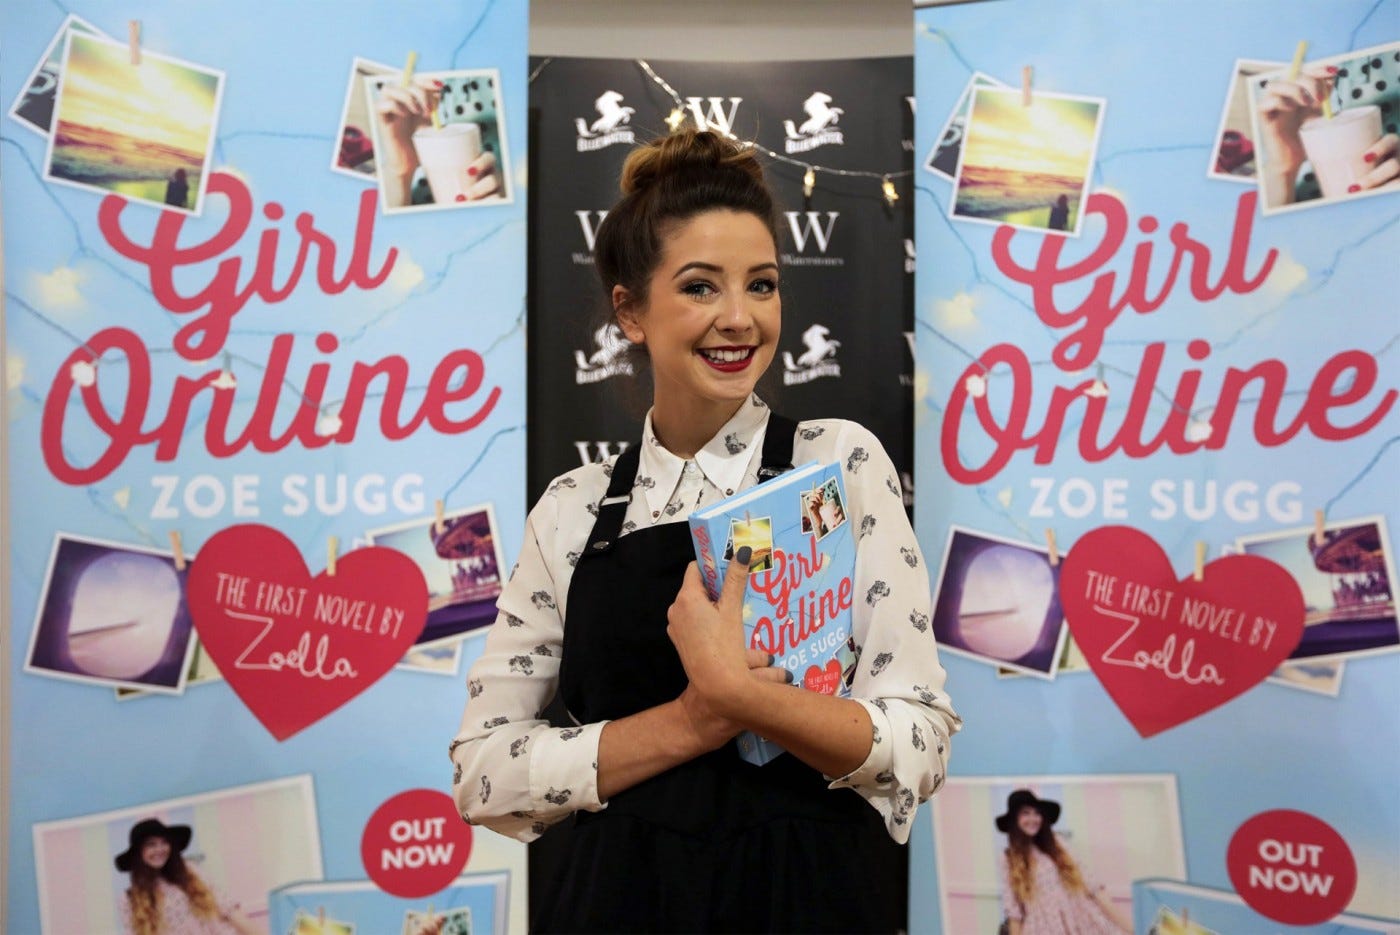 Zoe Sugg on a Book Tour for "Girl Online" .